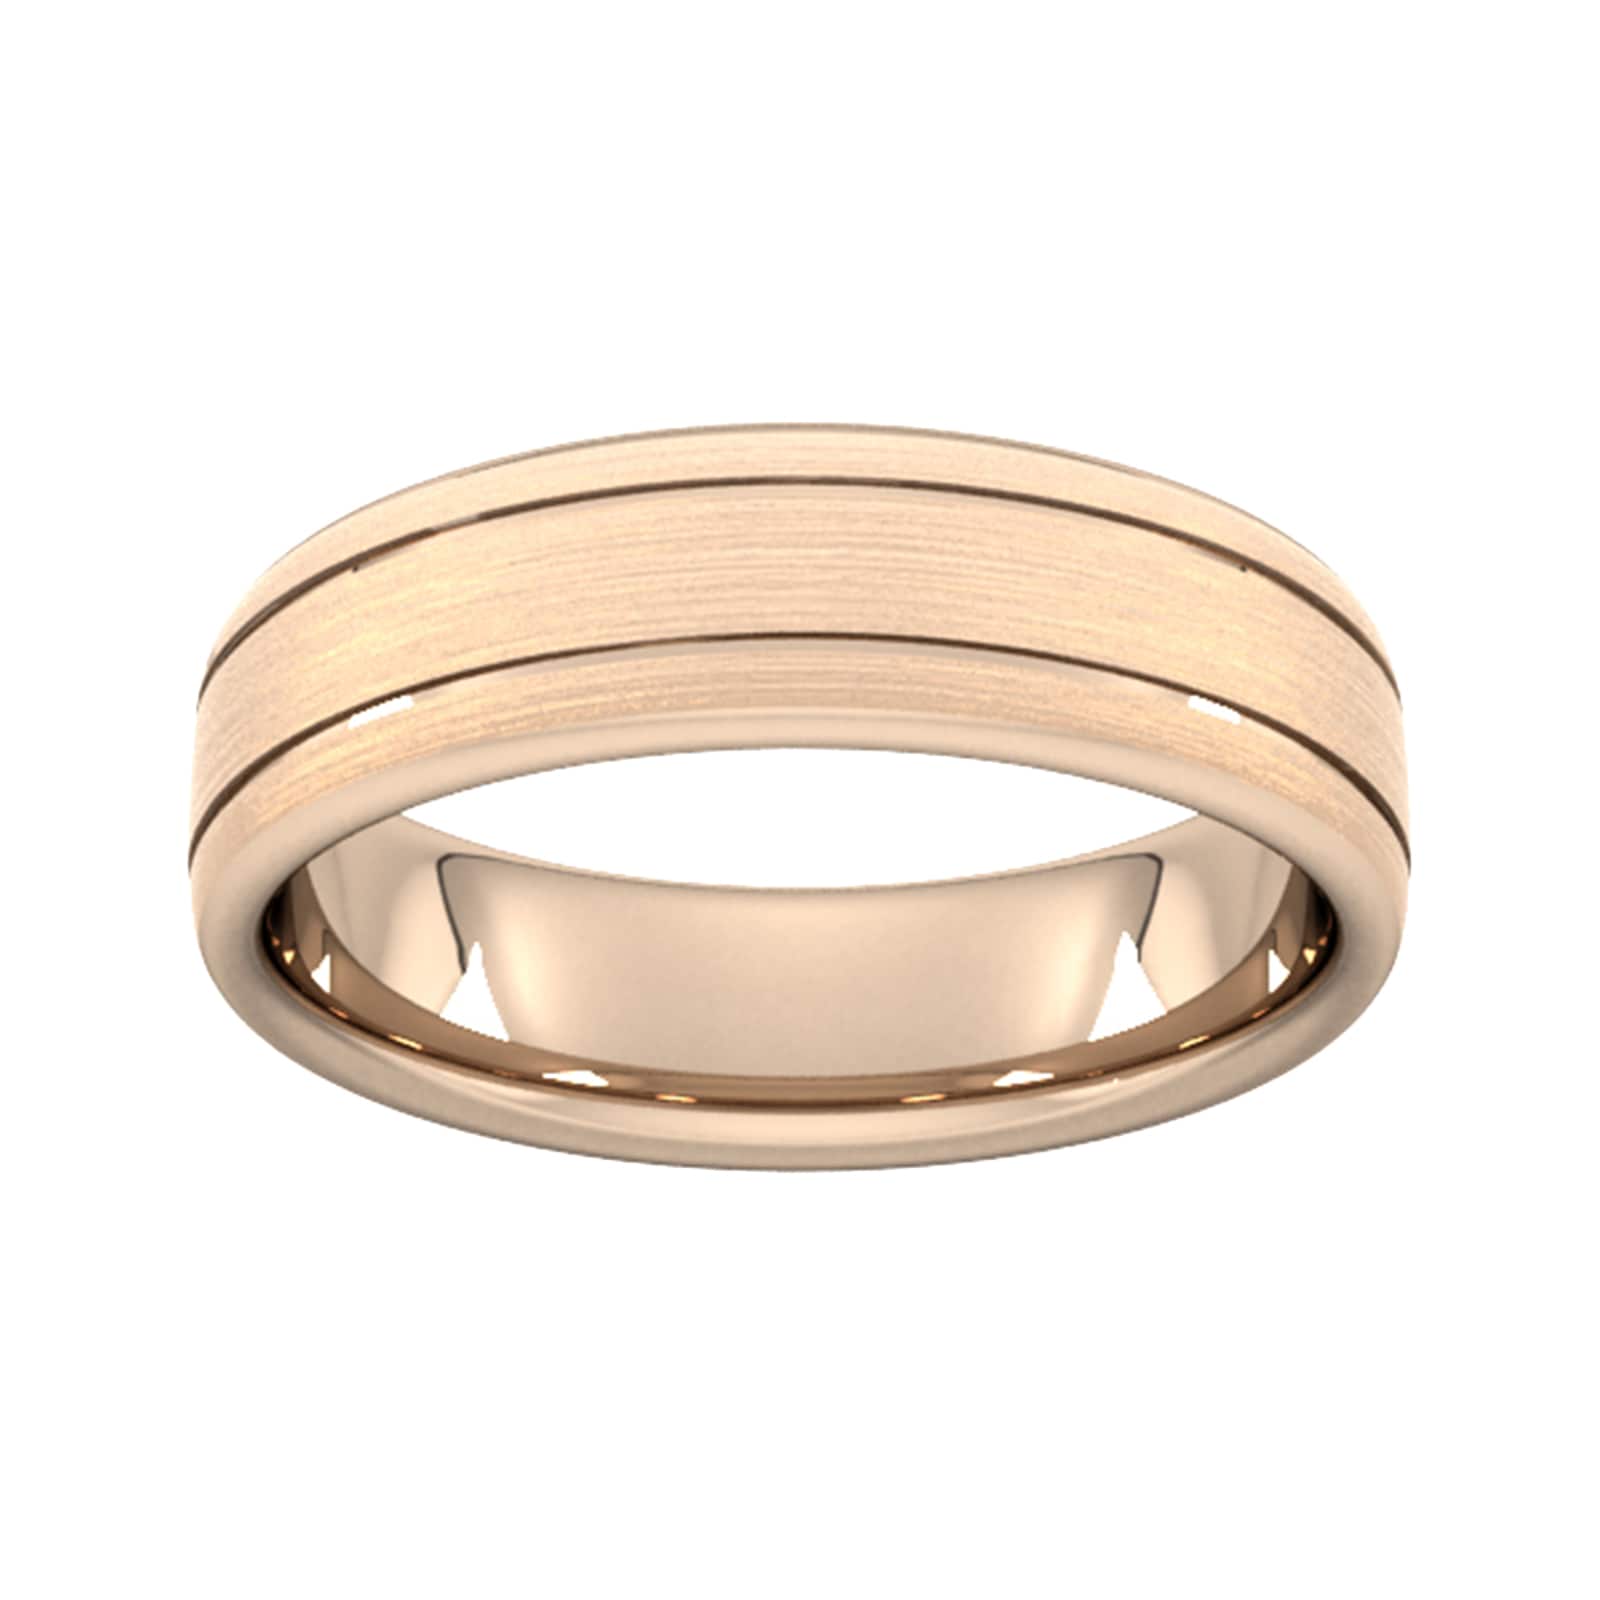 6mm Slight Court Heavy Matt Finish With Double Grooves Wedding Ring In 18 Carat Rose Gold - Ring Size H